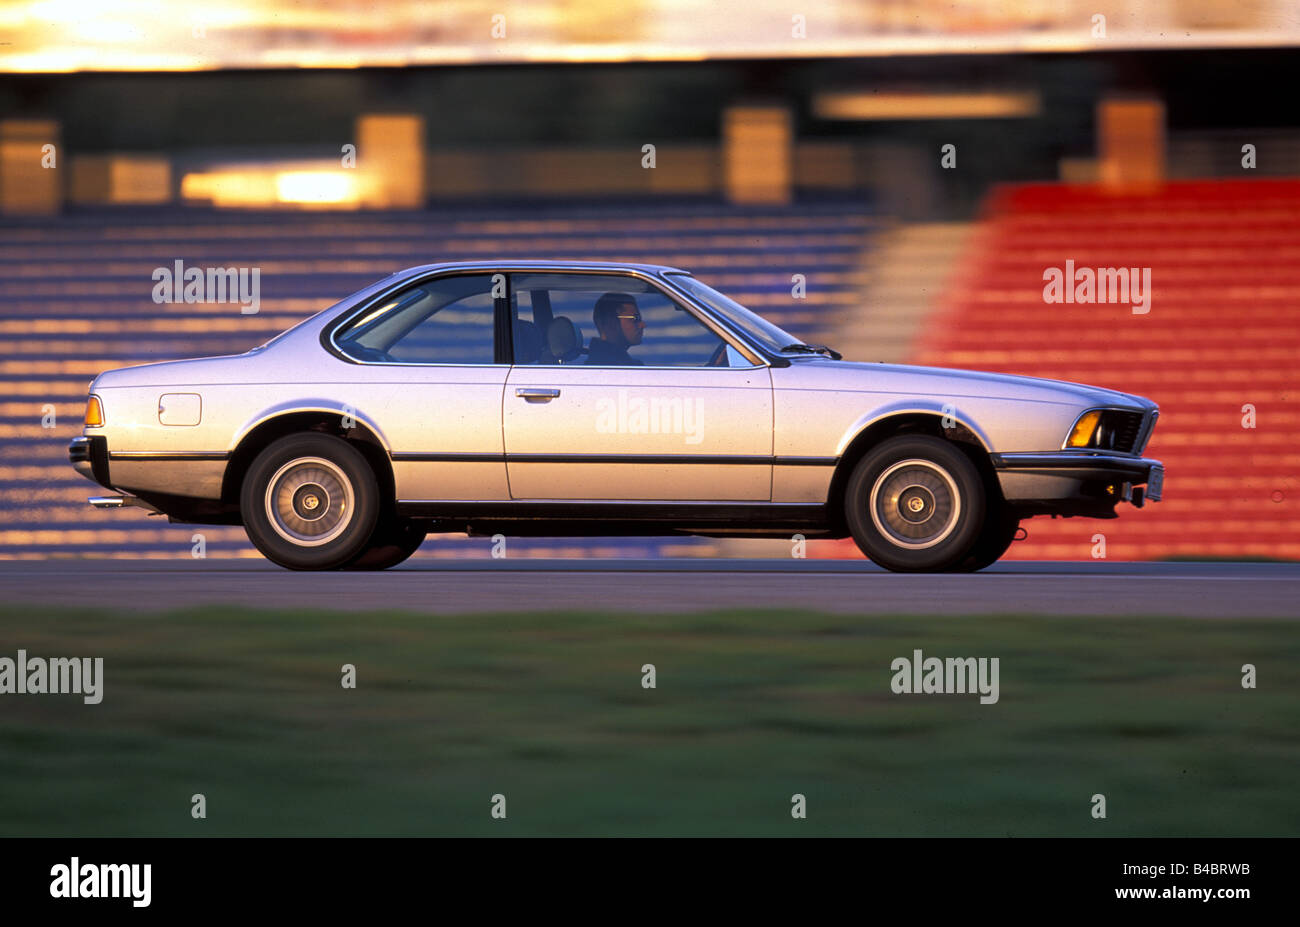 Car, BMW 633 CSi, model year 1976-1982, Youngtimer, The 70s, The 80s, driving, side view, photographer: Frank Herzog Stock Photo